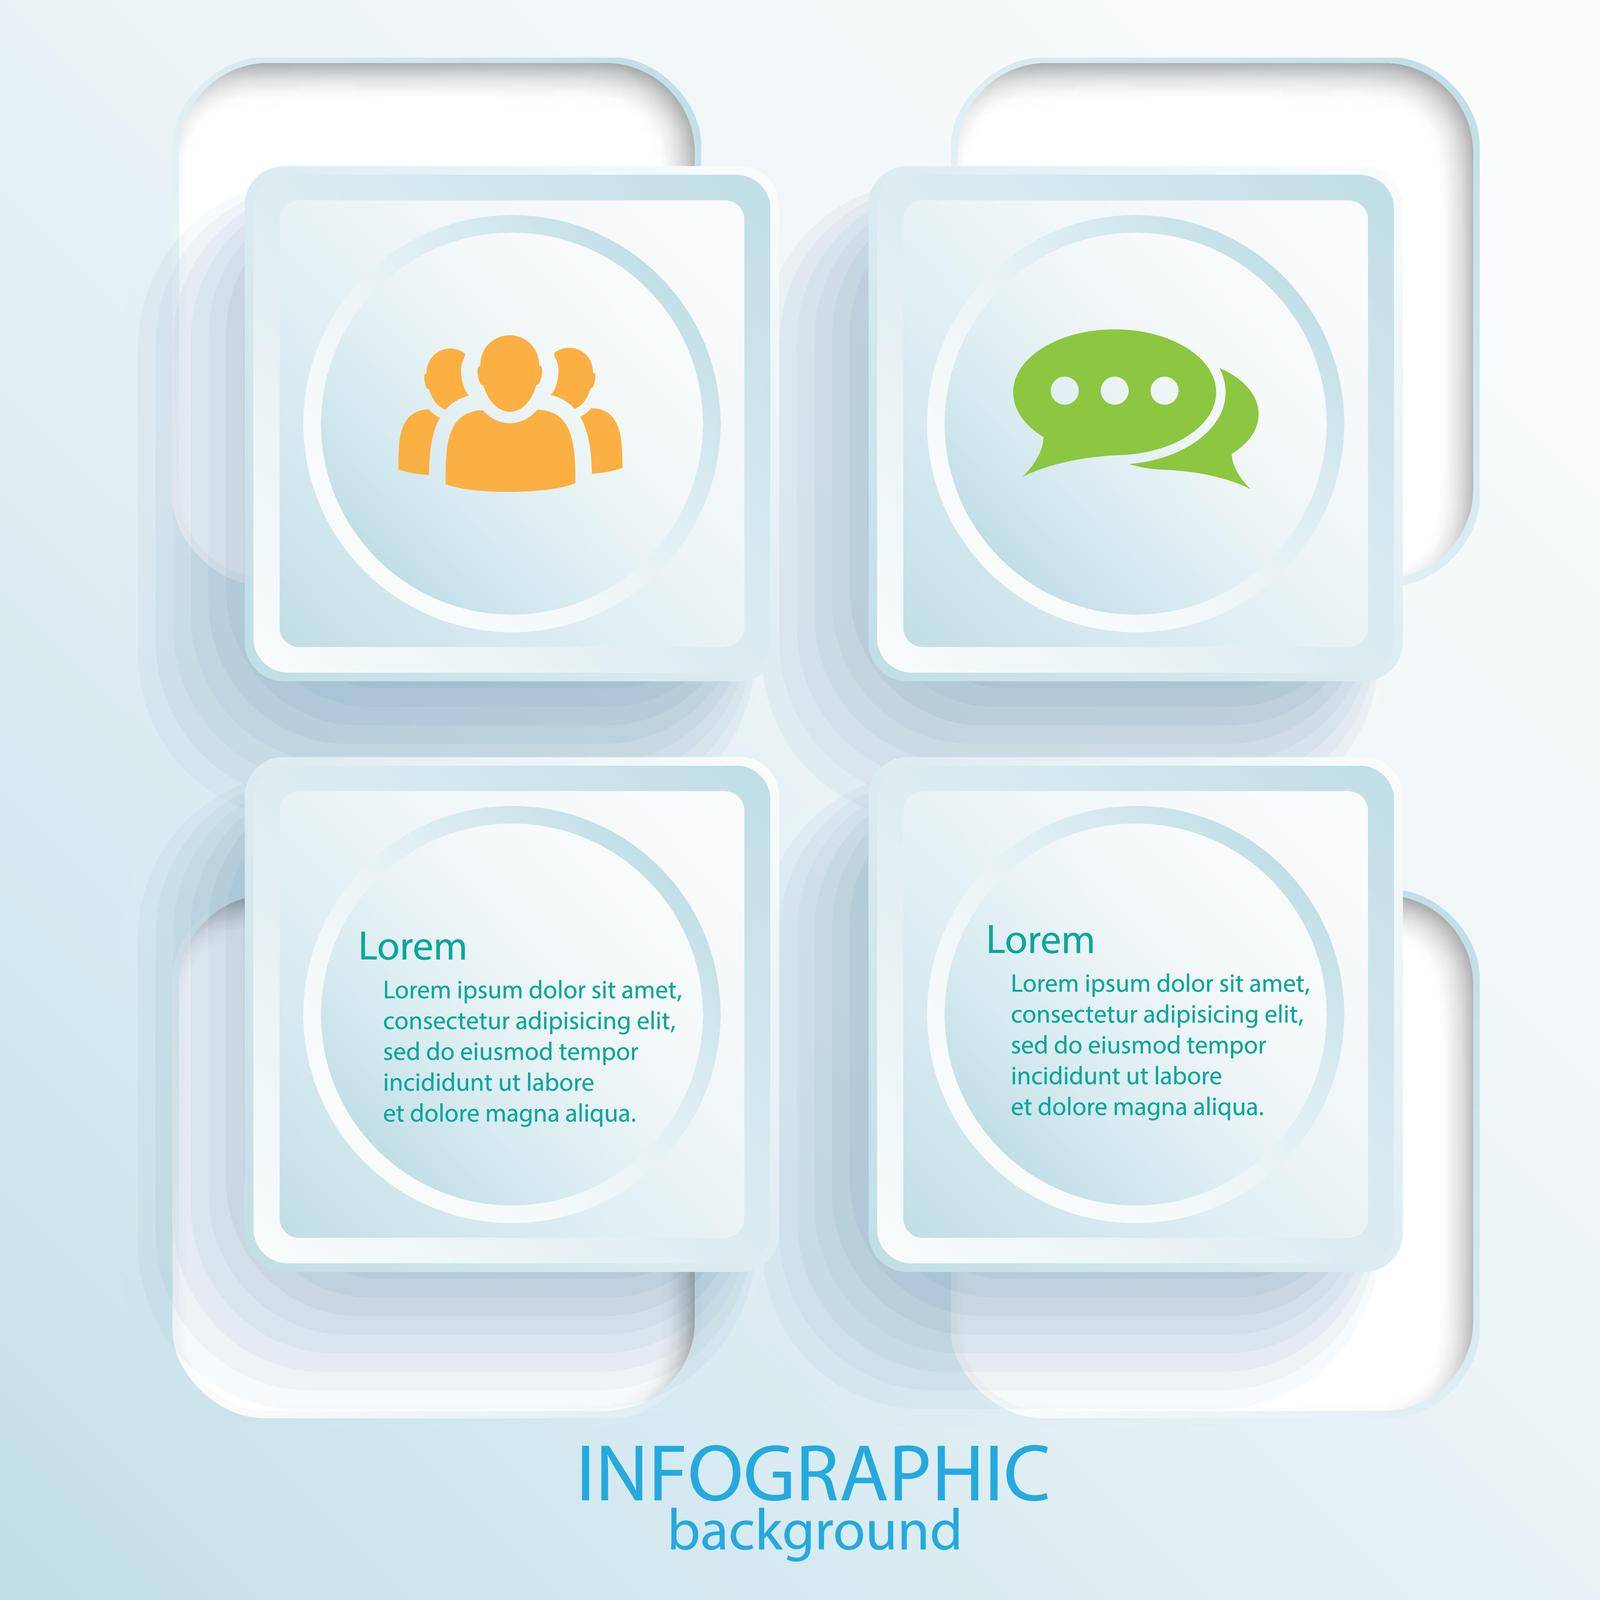 Abstract business infographic design concept with text web buttons and icons on light background vector illustration